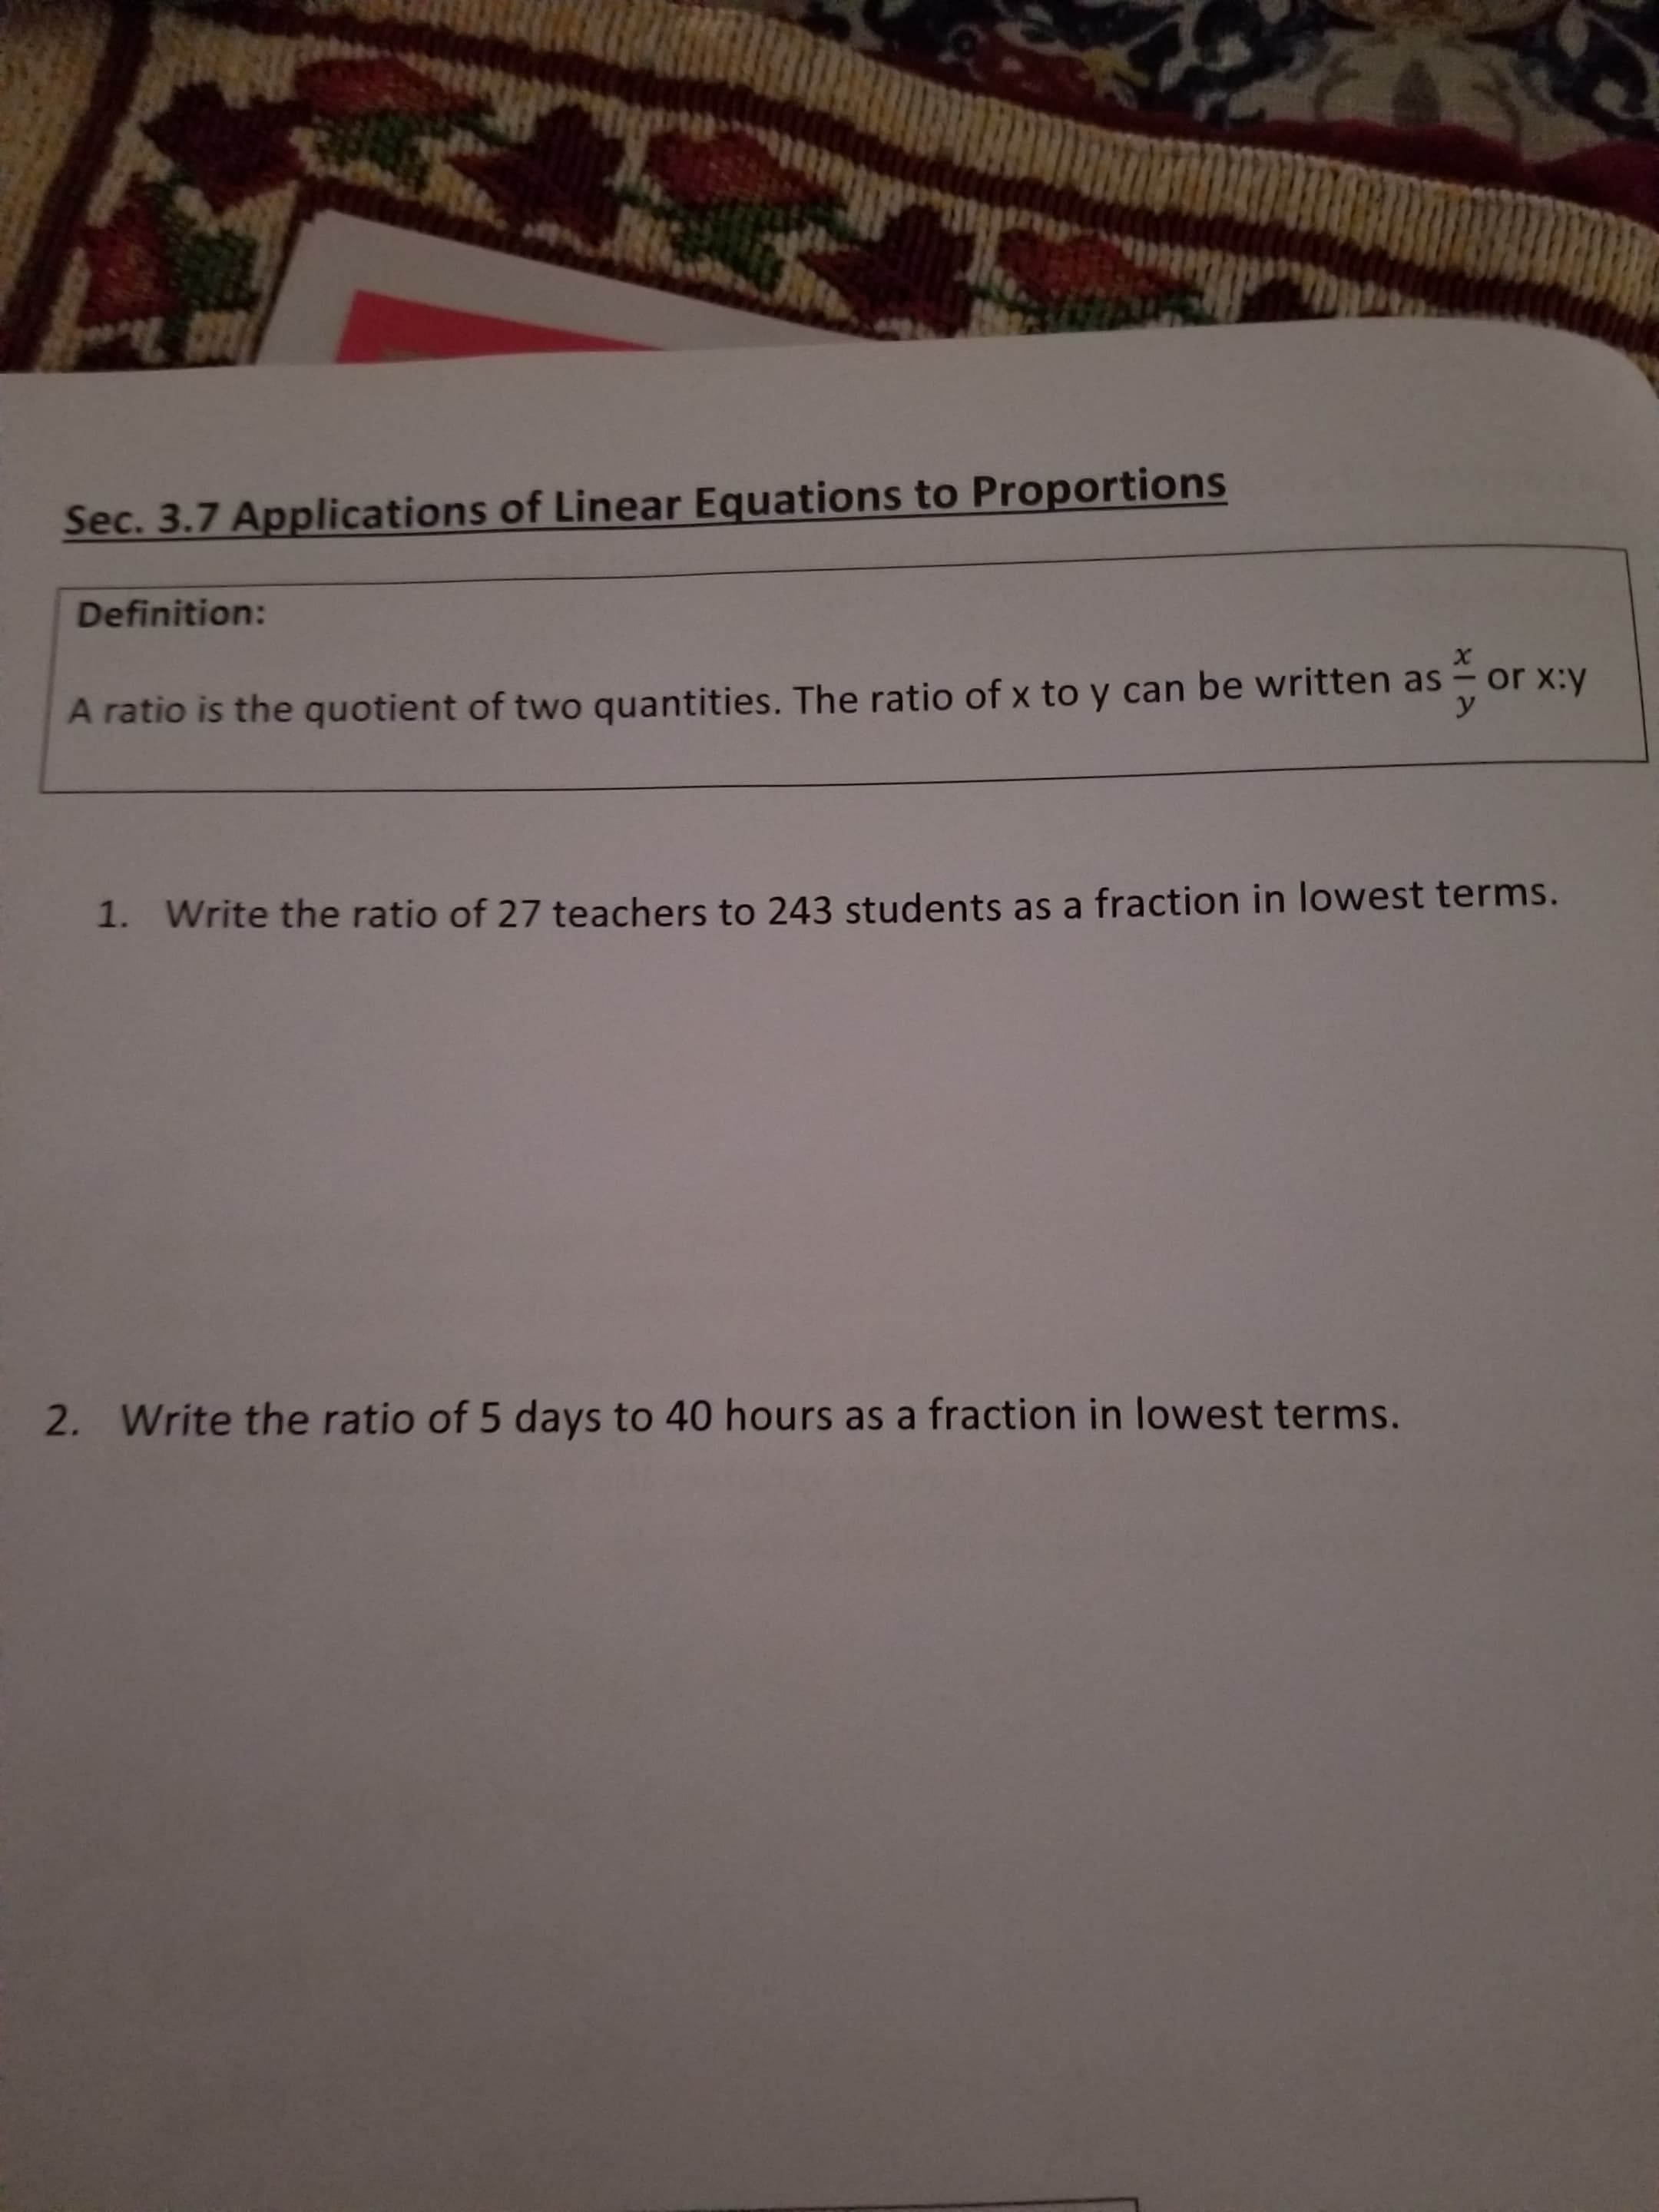 Sec. 3.7 Applications of Linear Equations to Proportions
Definition:
х
or x:y
A ratio is the quotient of two quantities. The ratio of x to y can be written as
1. Write the ratio of 27 teachers to 243 students as a fraction in lowest terms.
2. Write the ratio of 5 days to 40 hours as a fraction in lowest terms.
